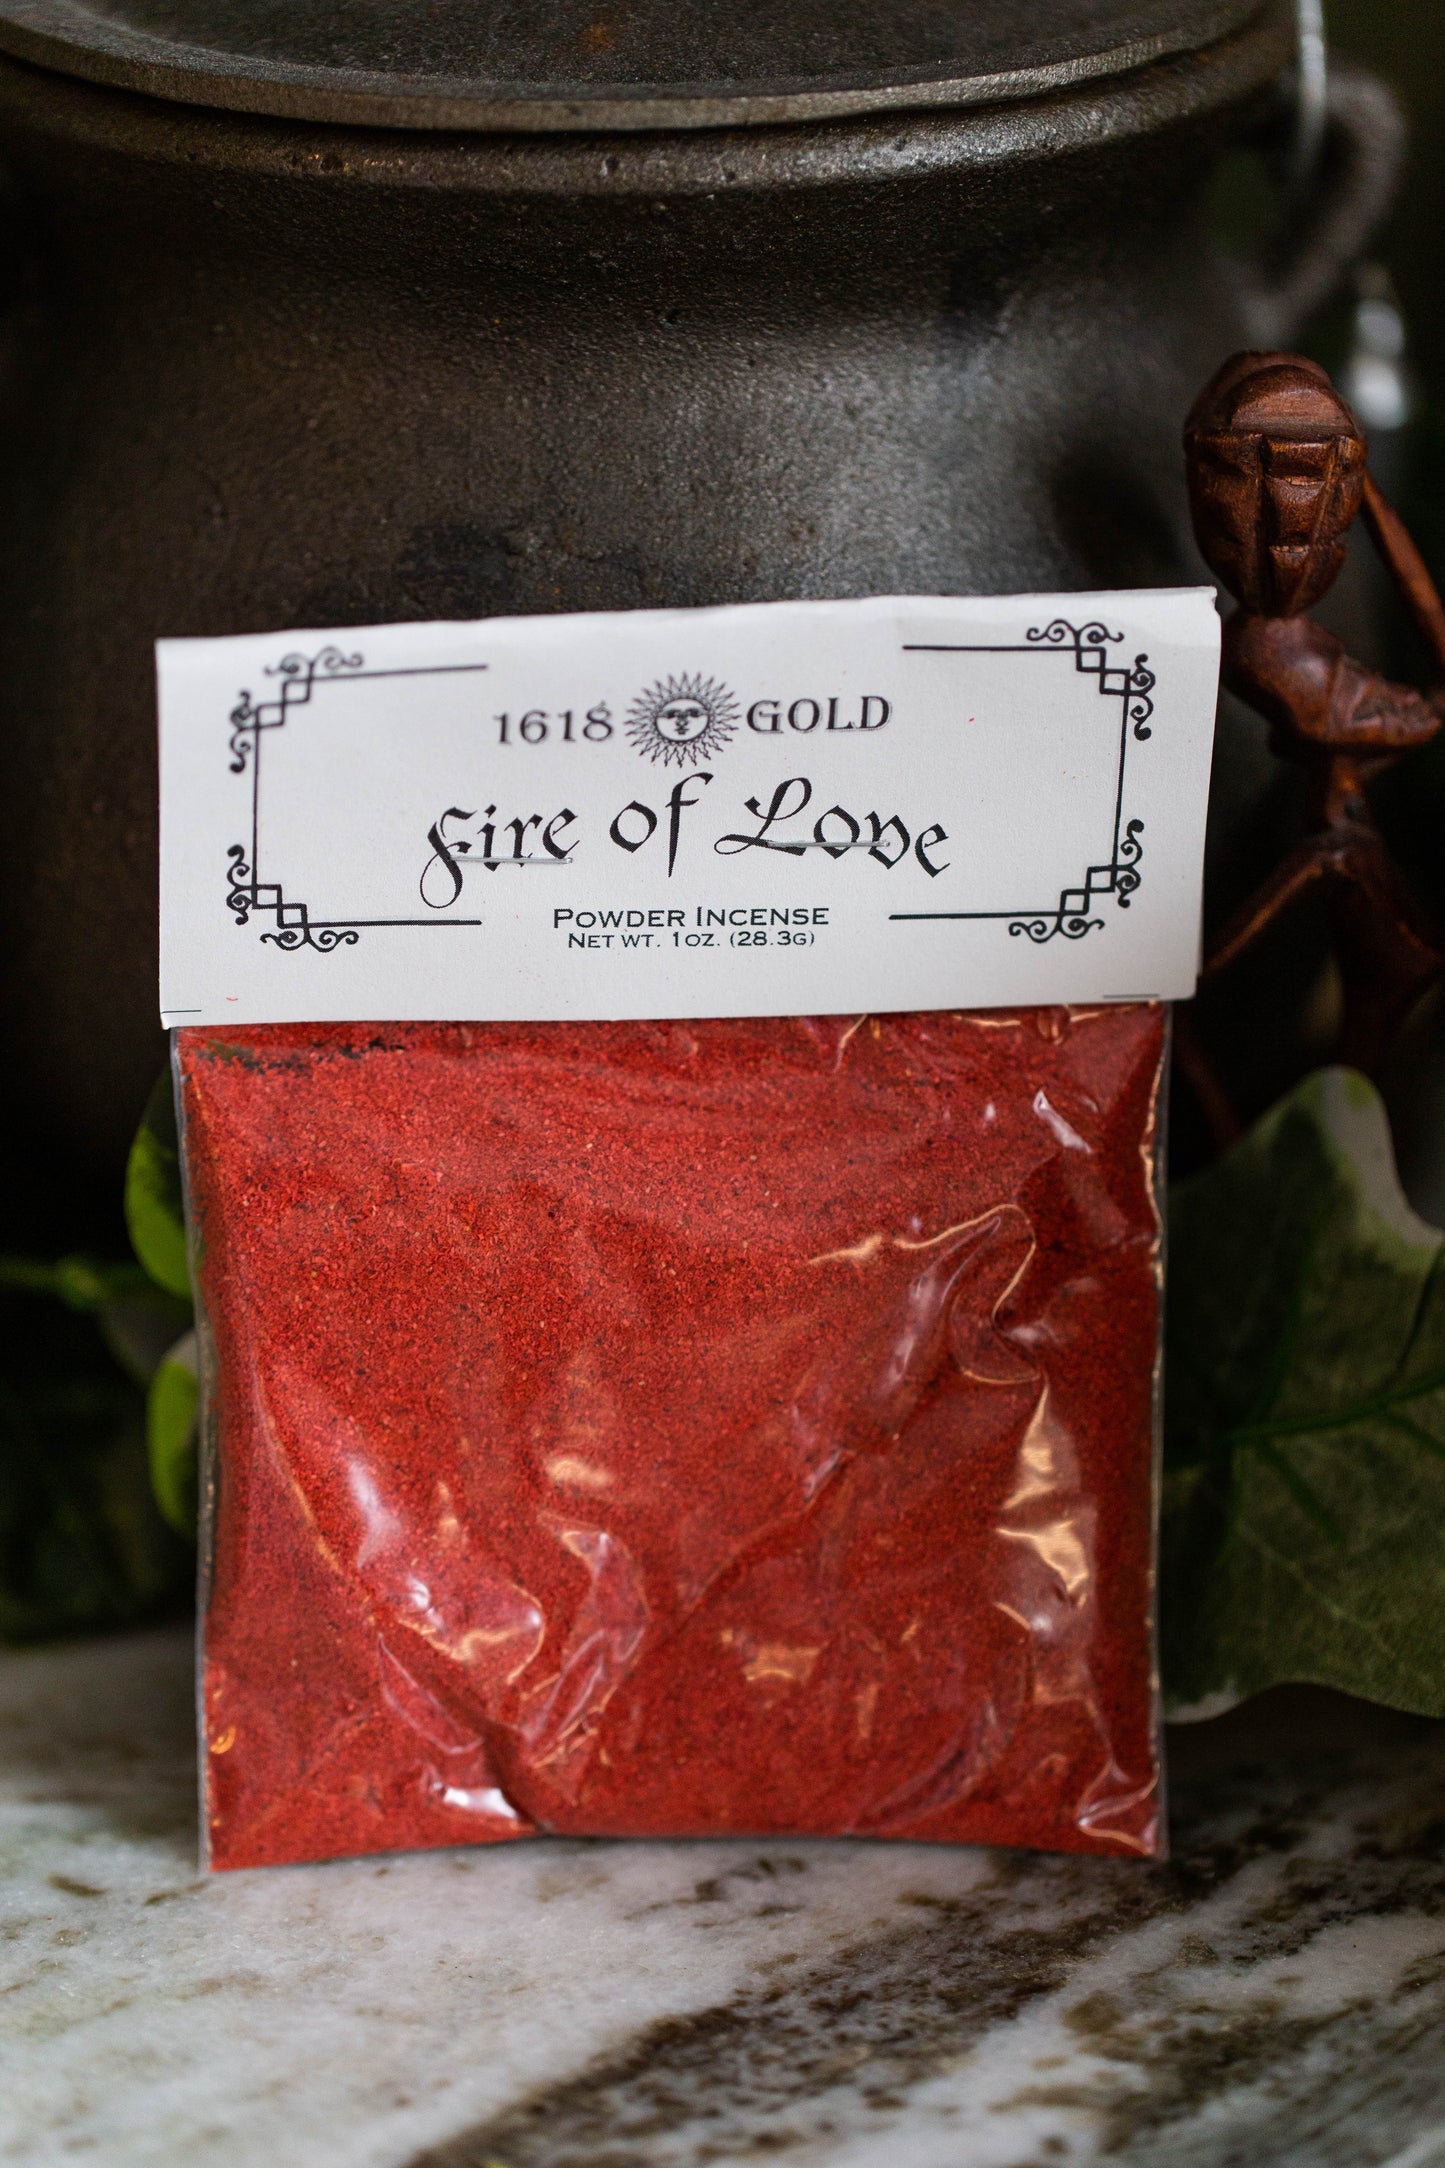 1618 Gold - FIRE OF LOVE - Powder Incense for igniting fires of love, lust, attraction